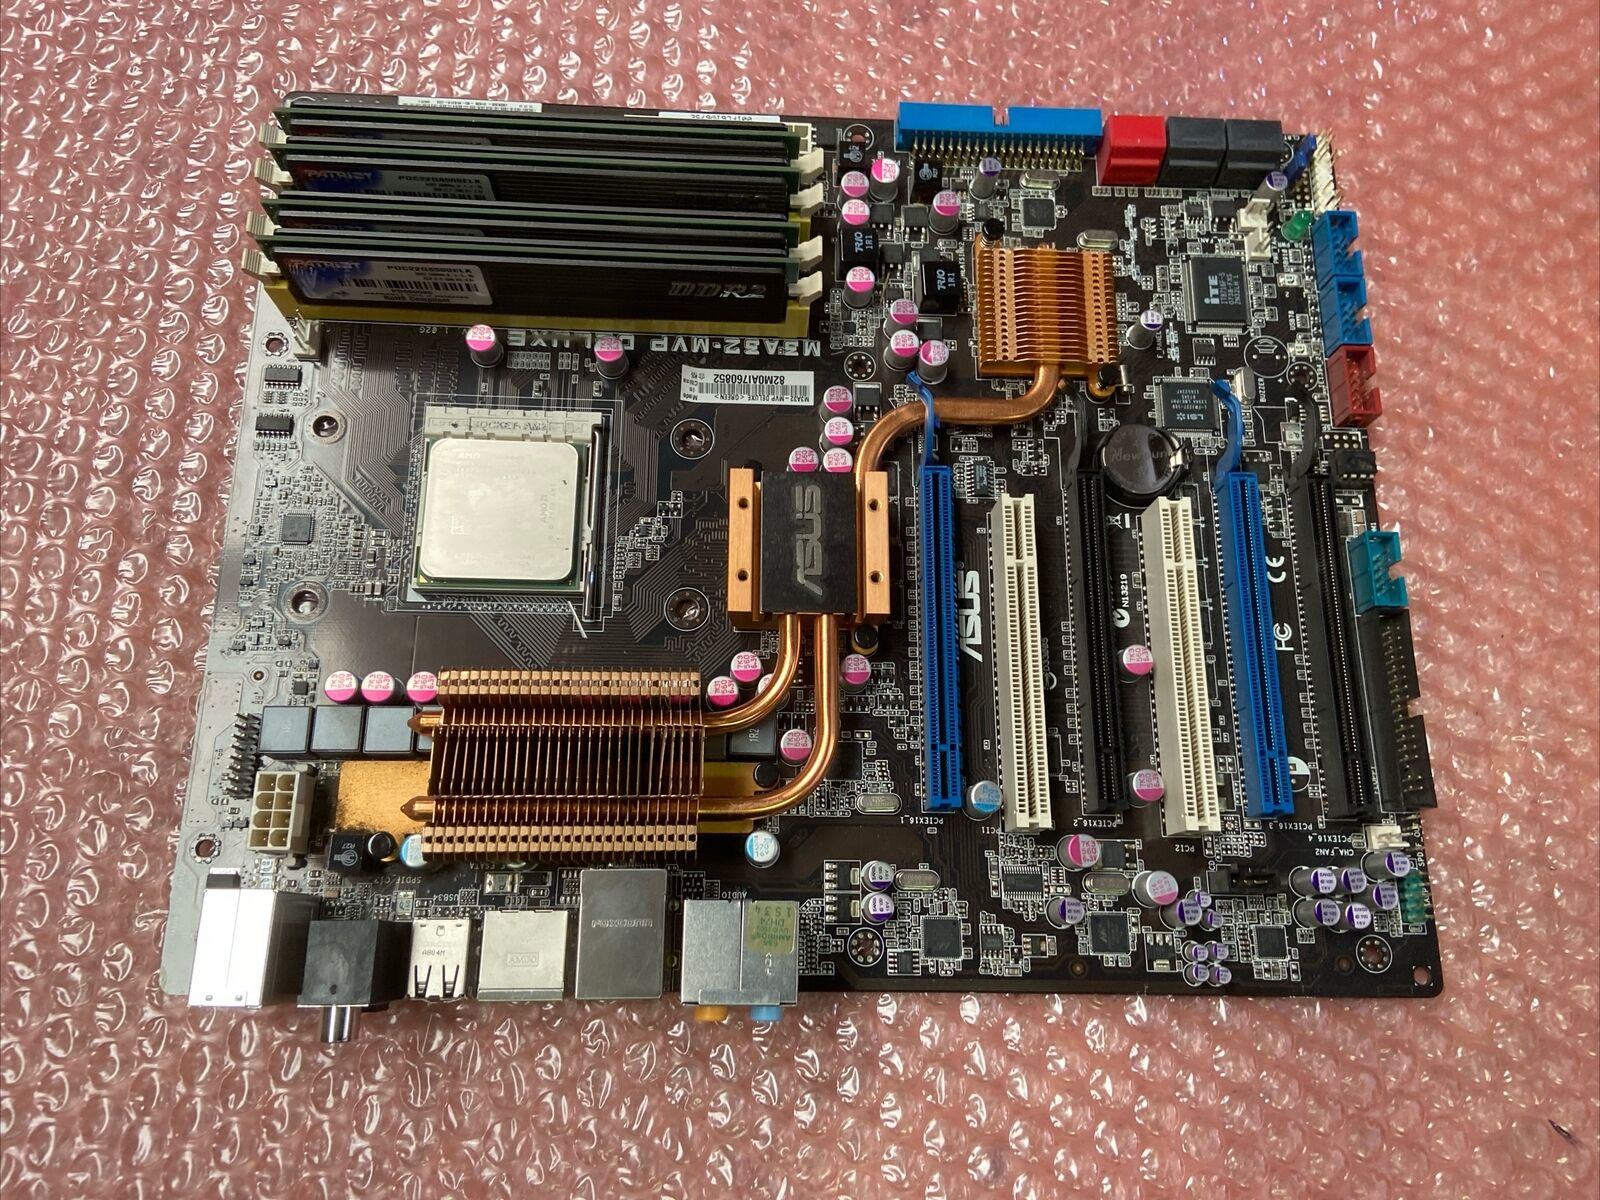 Asus M3A32-MVP deluxe motherboard w/ AMD Phenom 9850 2.5 GHz CPU, 8GB RAM